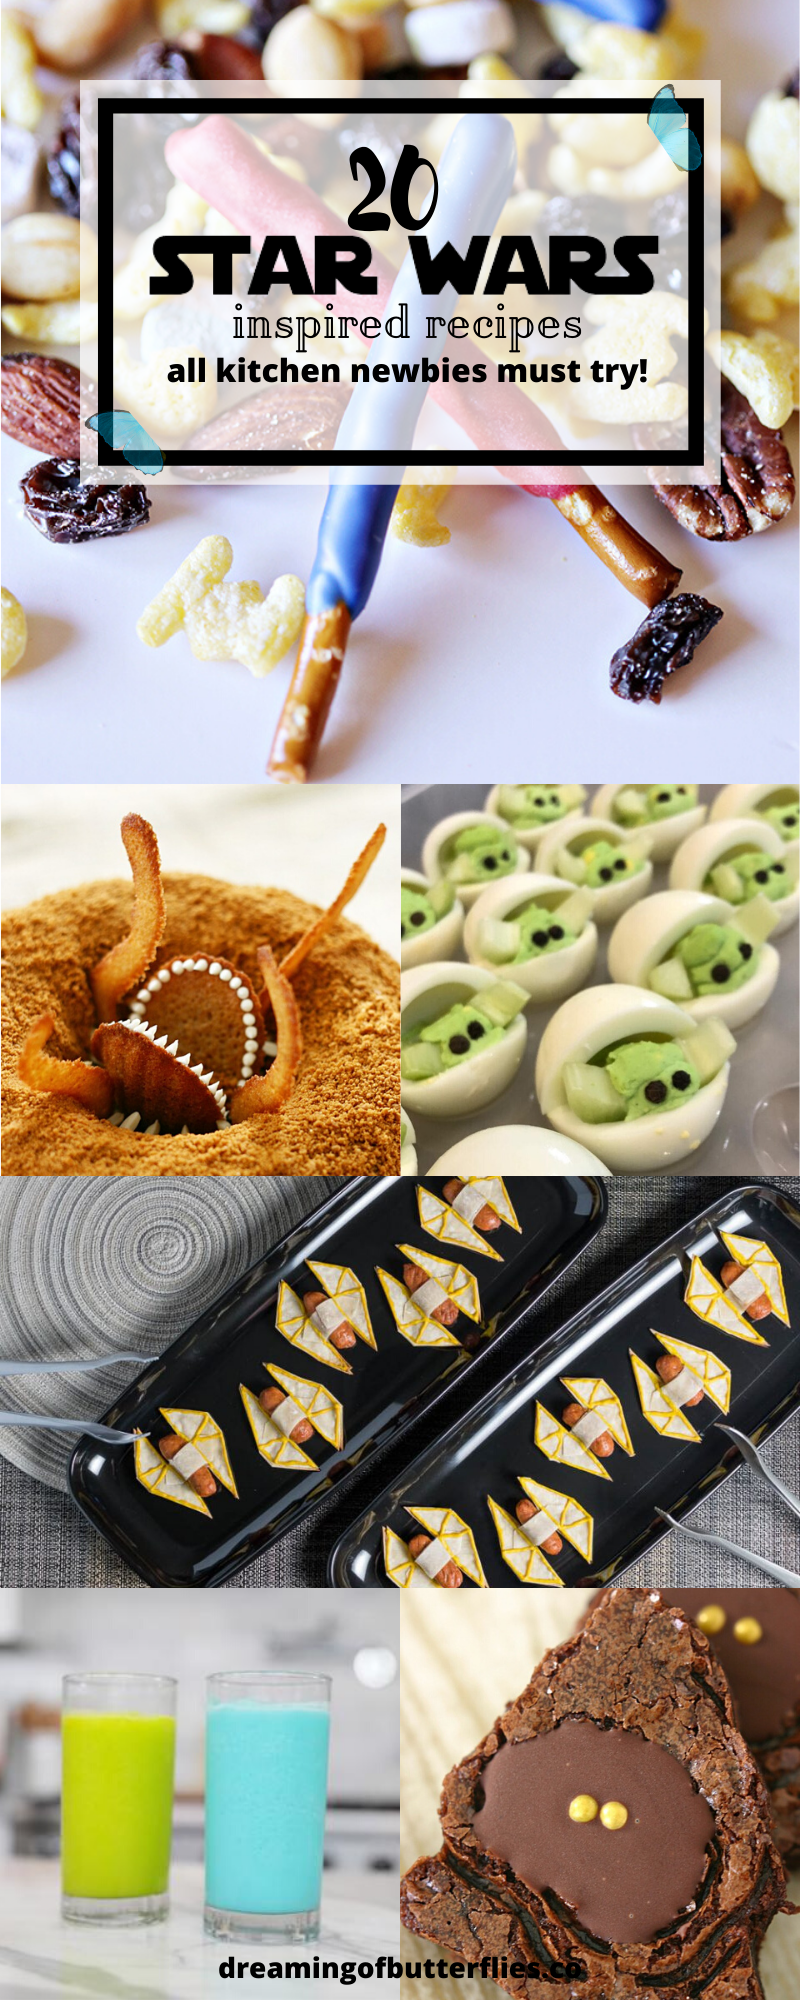 https://www.dreamingofbutterflies.co/wp-content/uploads/2020/04/star-wars-inspired-recipes-pin-2-1.png